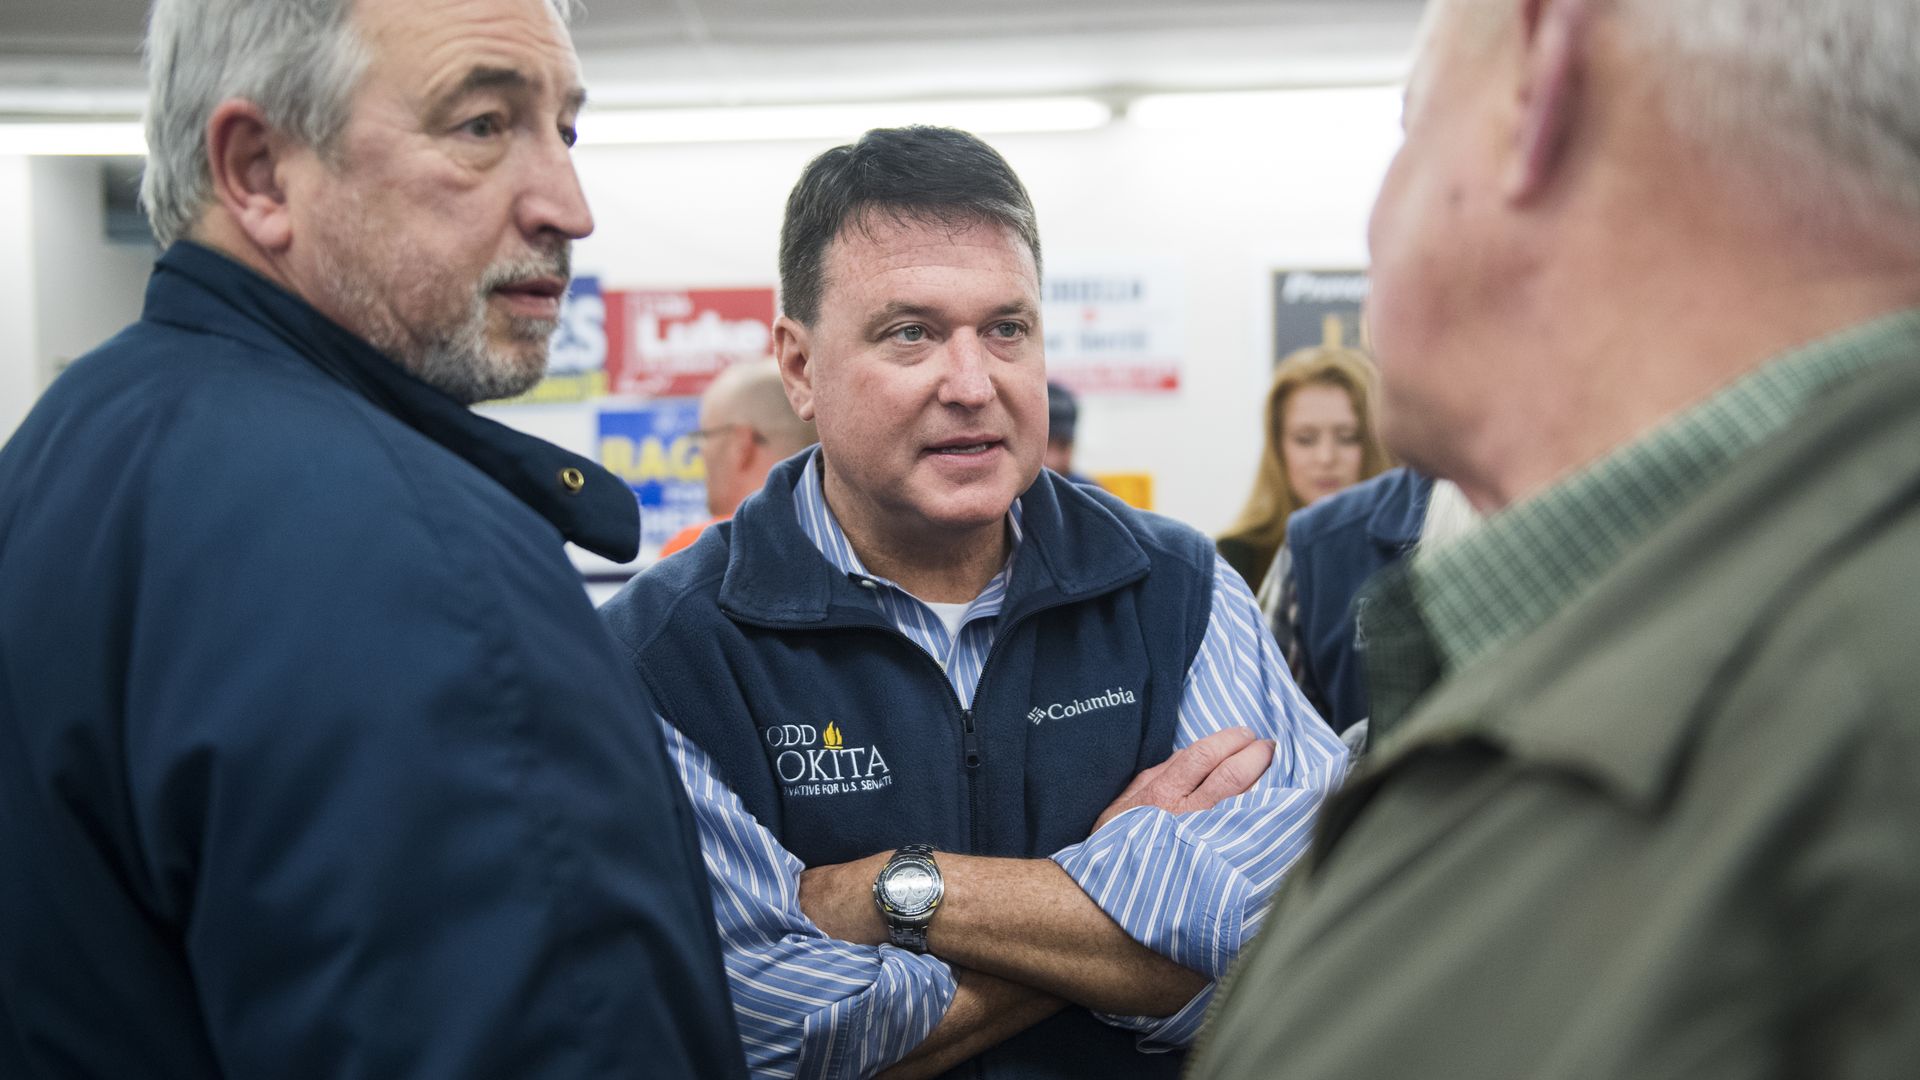 Rep. Todd Rokita in a vest with his arms crossed